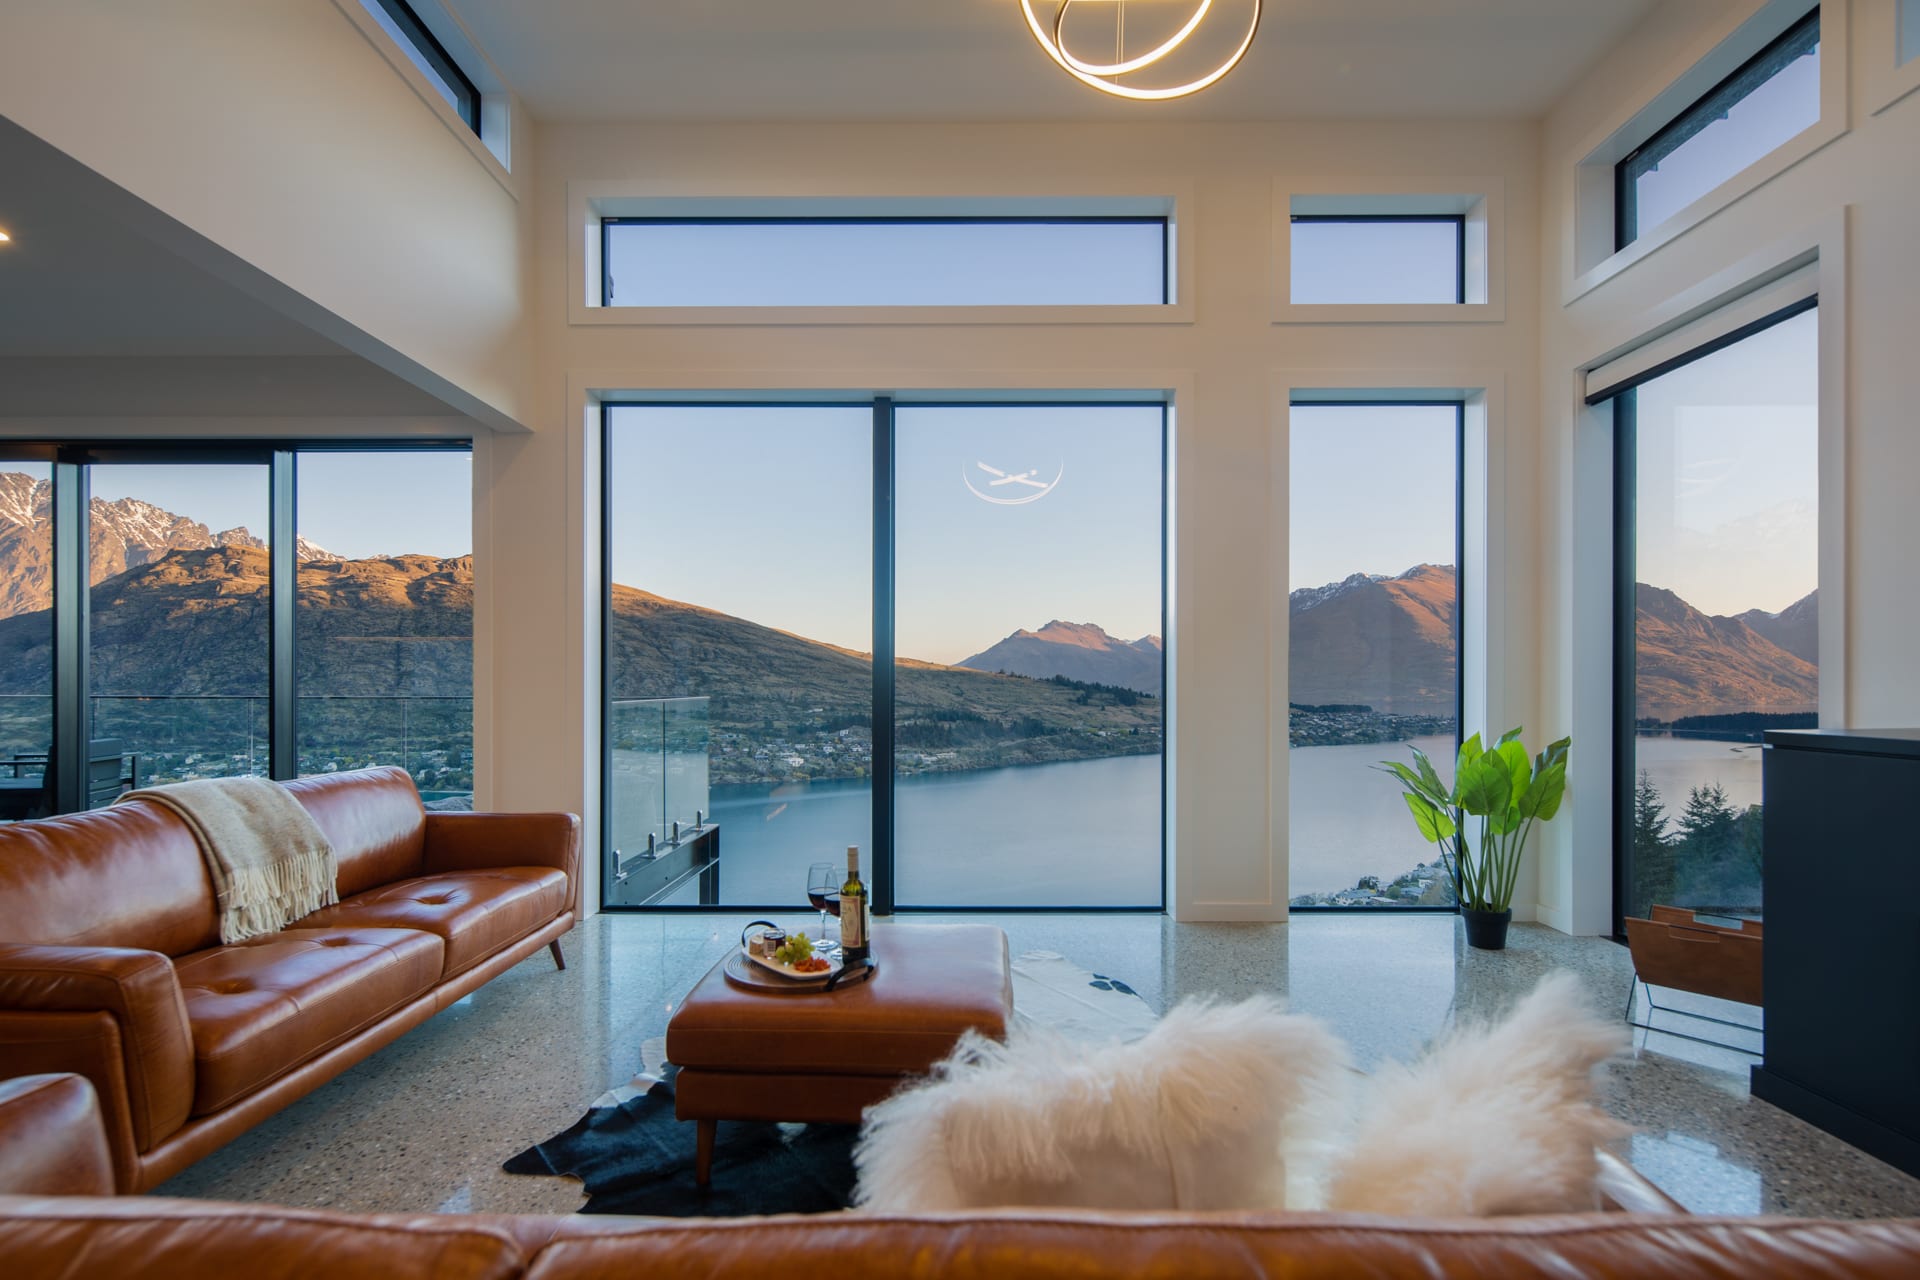 Relax and admire the views in this stunning lounge